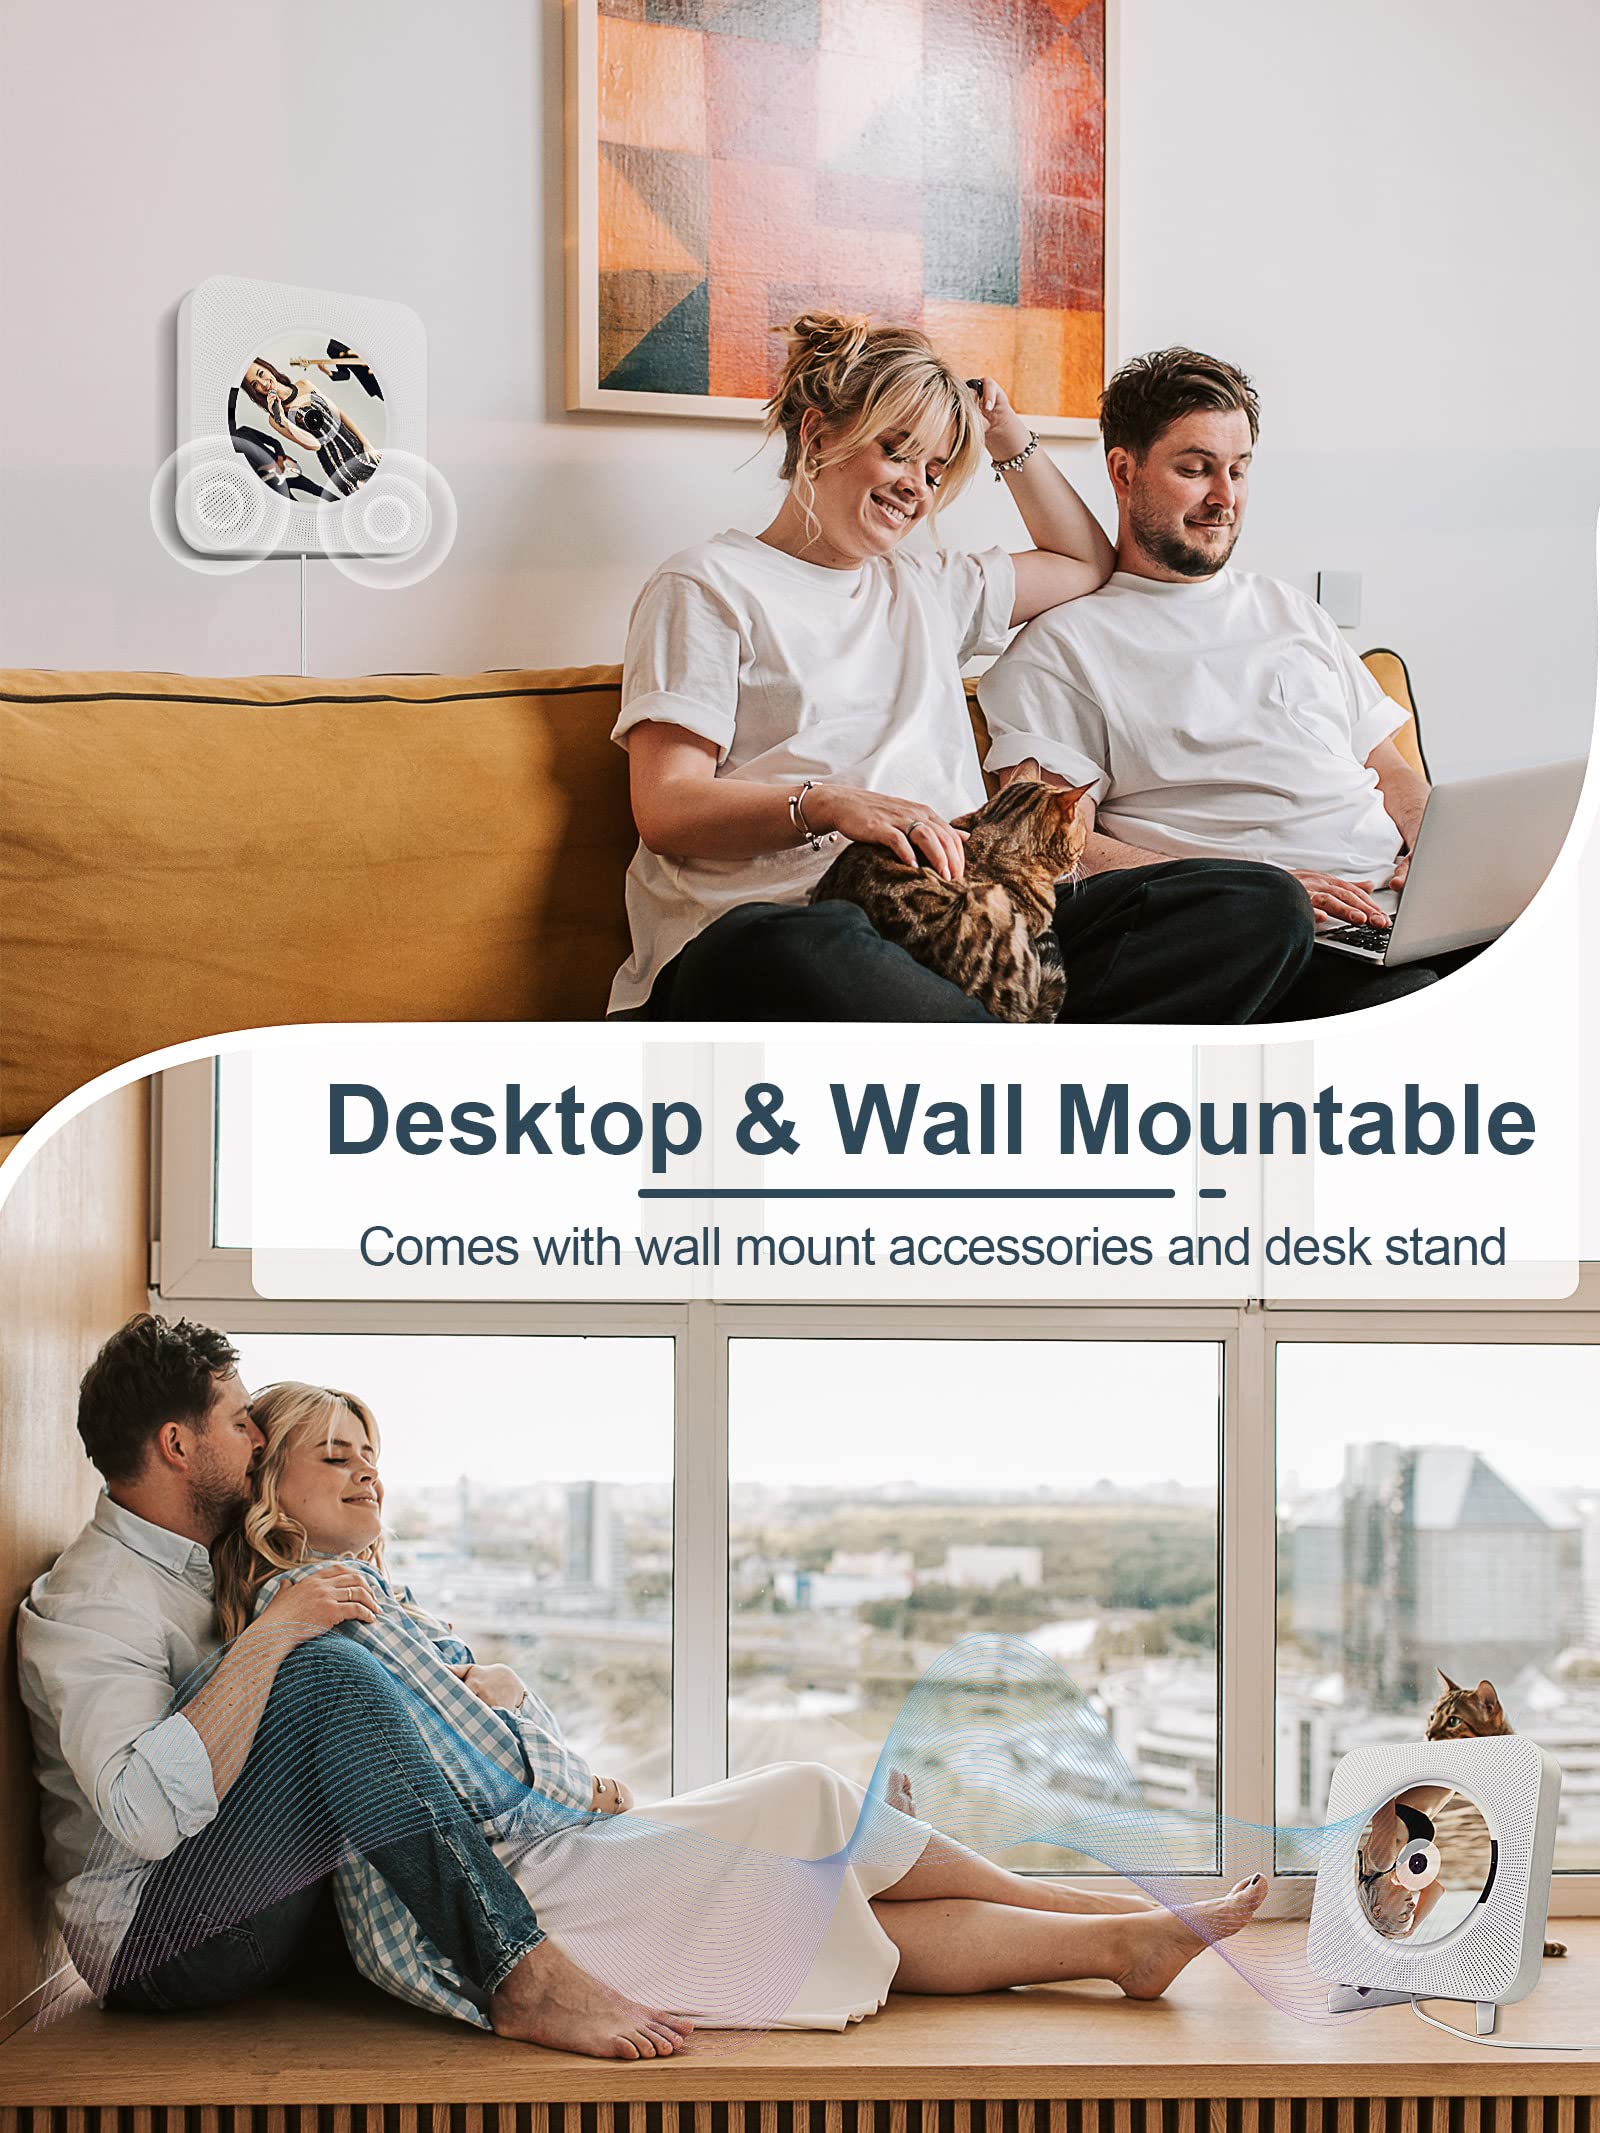 Portable Wall Mounted CD Player with Bluetooth, Homlab Mountable CD Music Player Built-in HiFi Speakers, Home Audio Boombox with Remote Control, FM Radio, LCD Display, Headphone Jack AUX USB TF Input